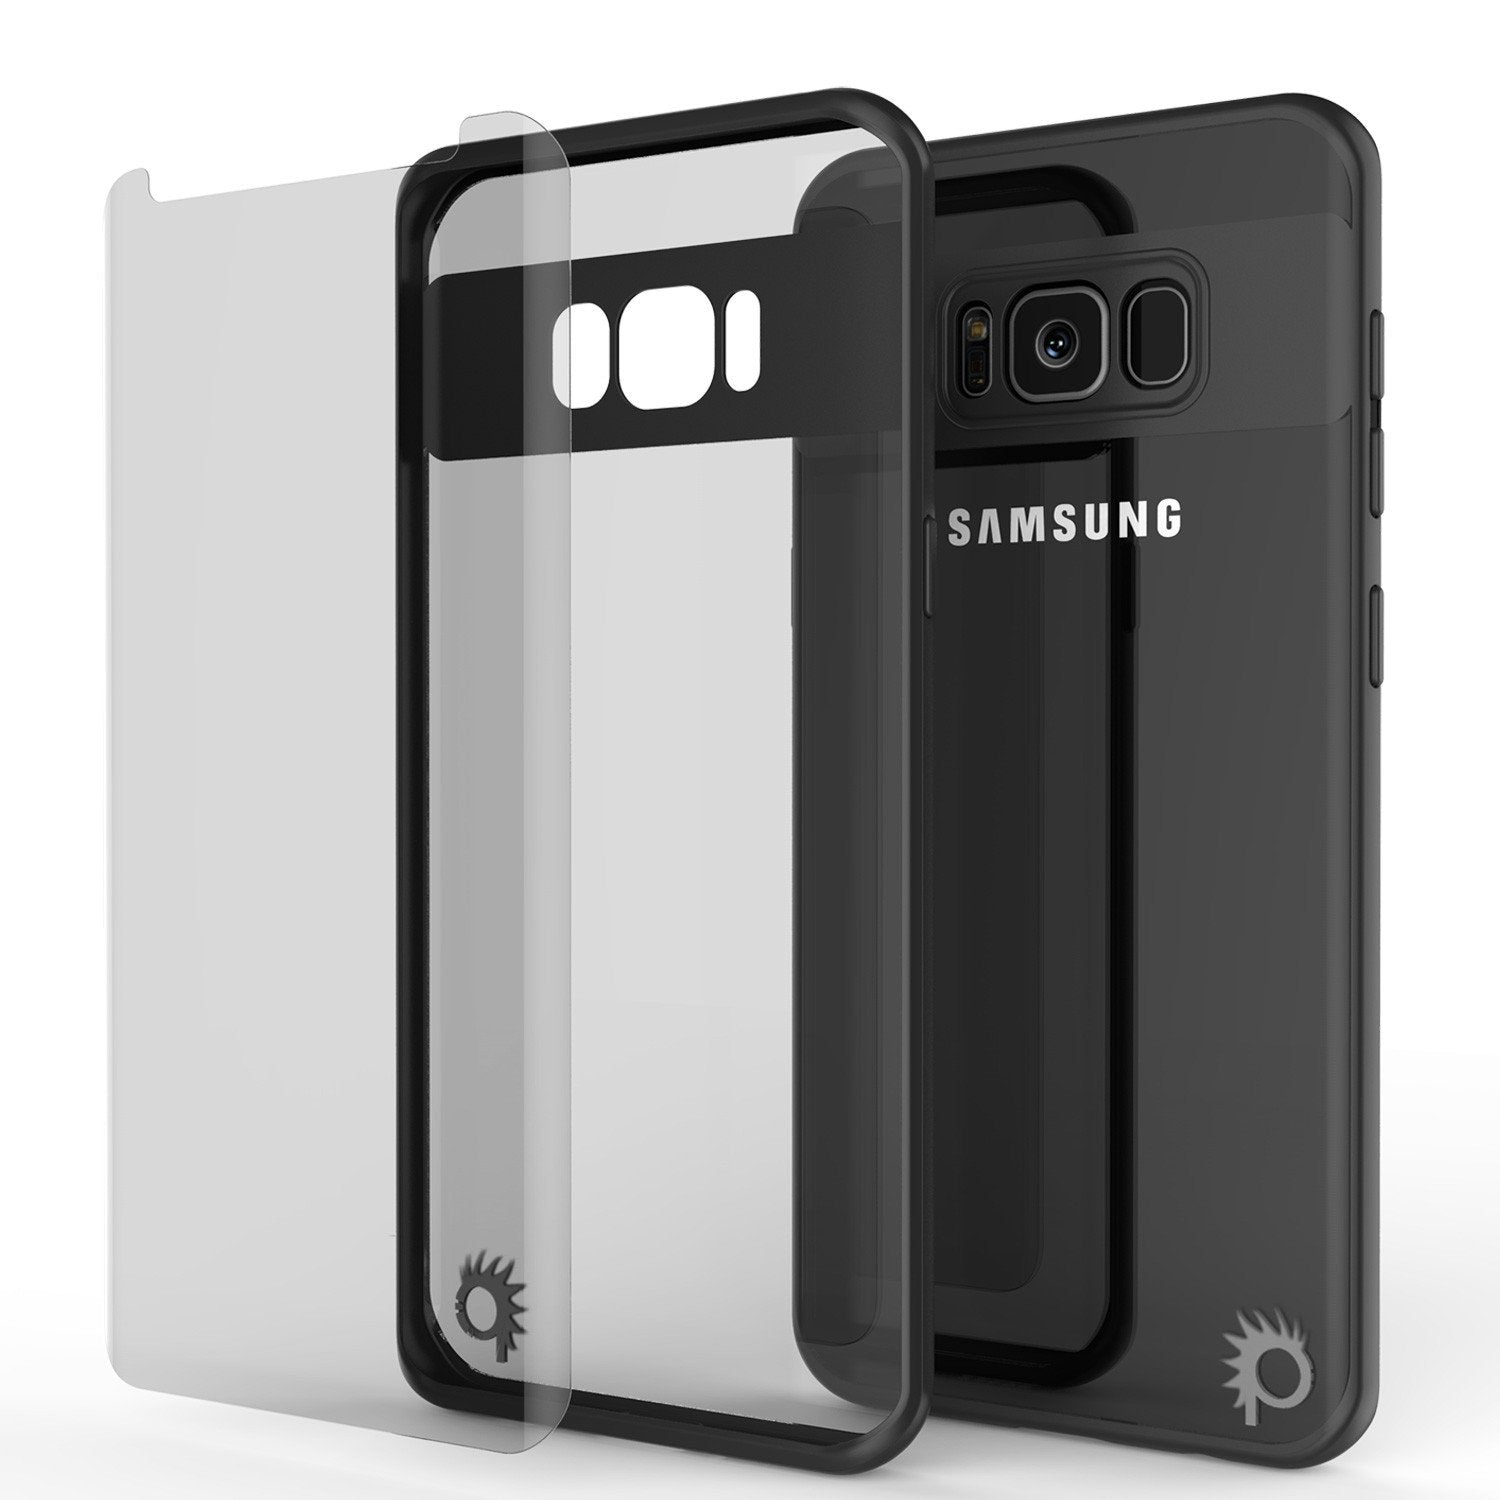 Galaxy S8 Case, Punkcase [MASK Series] [BLACK] Full Body Hybrid Dual Layer TPU Cover W/ Protective PUNKSHIELD Screen Protector